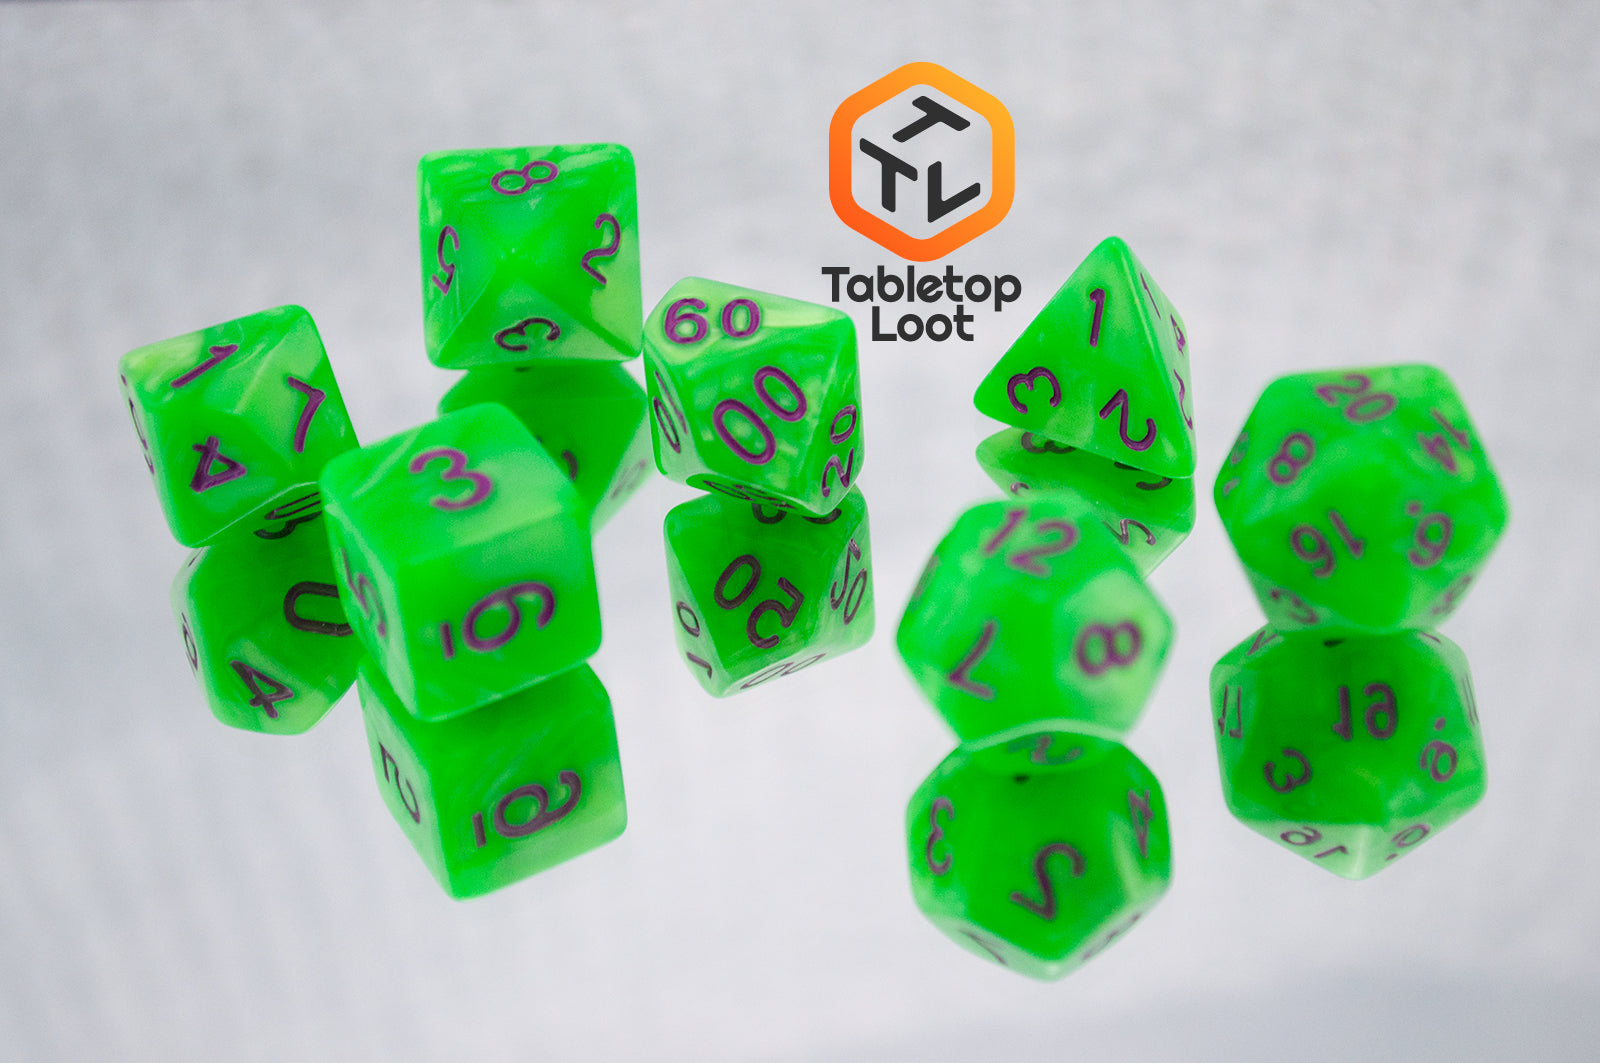 The Radioactive Green 7 piece dice set from Tabletop Loot with bright green resin and purple numbering.